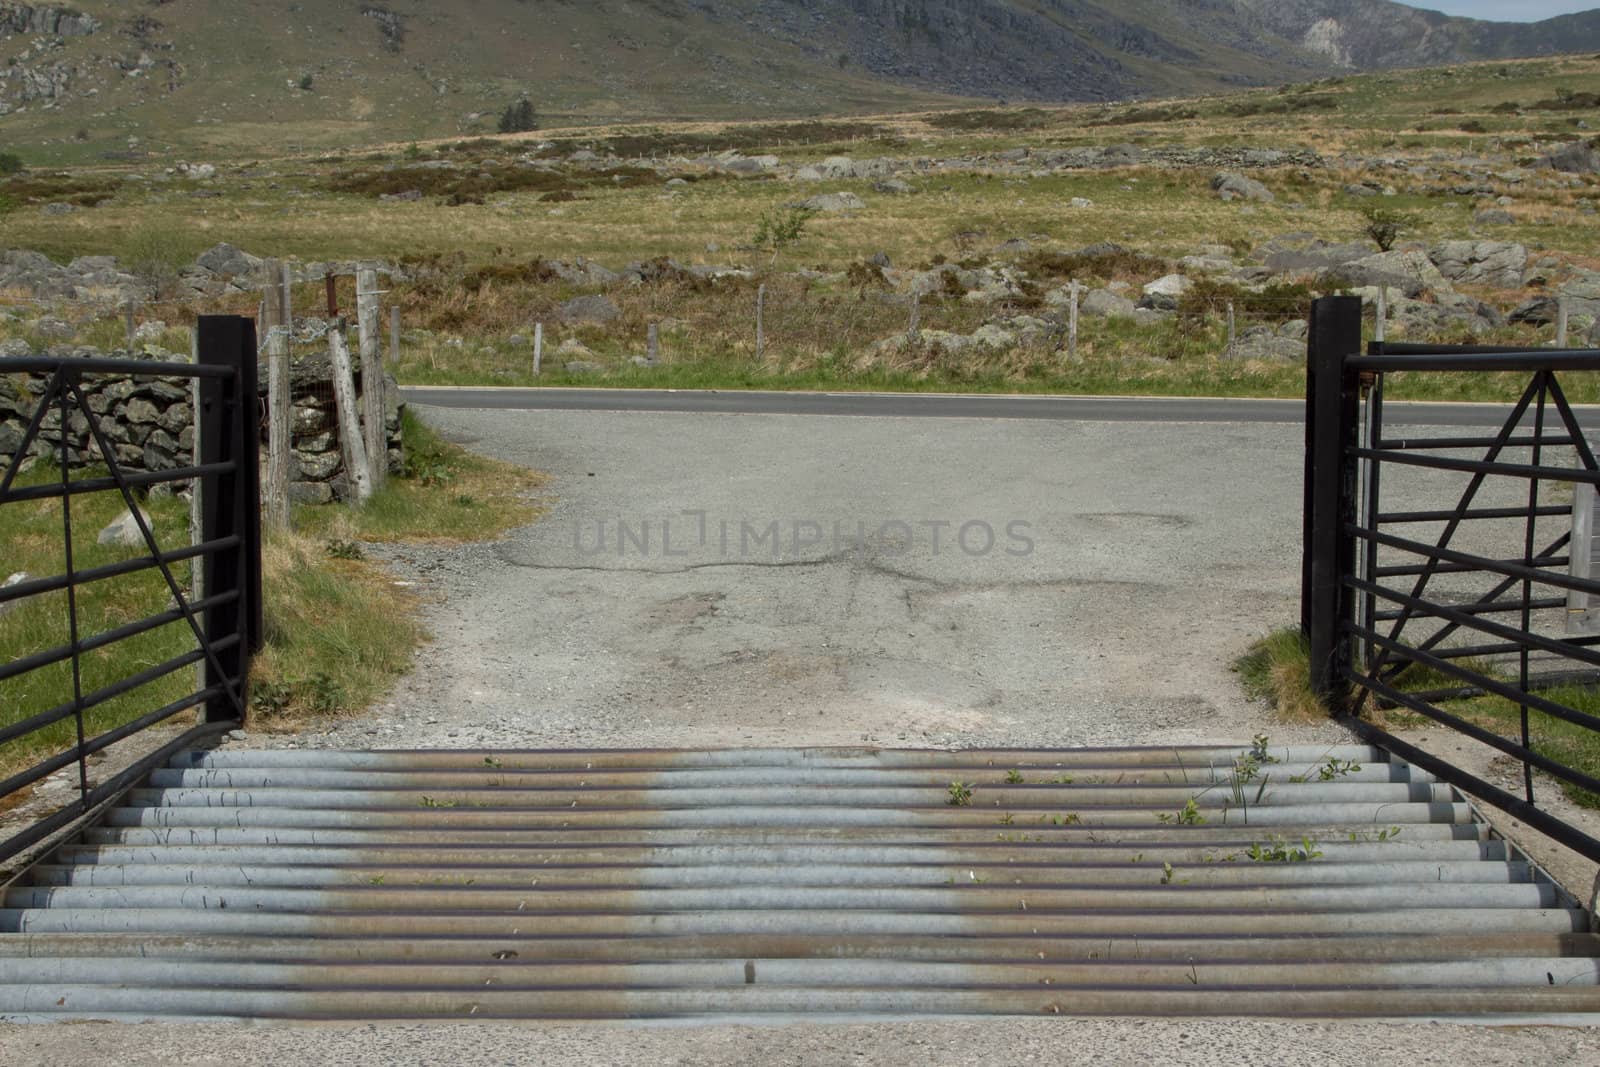 A metal cattle grid across an access point with black gates and concrete leading to the main road.